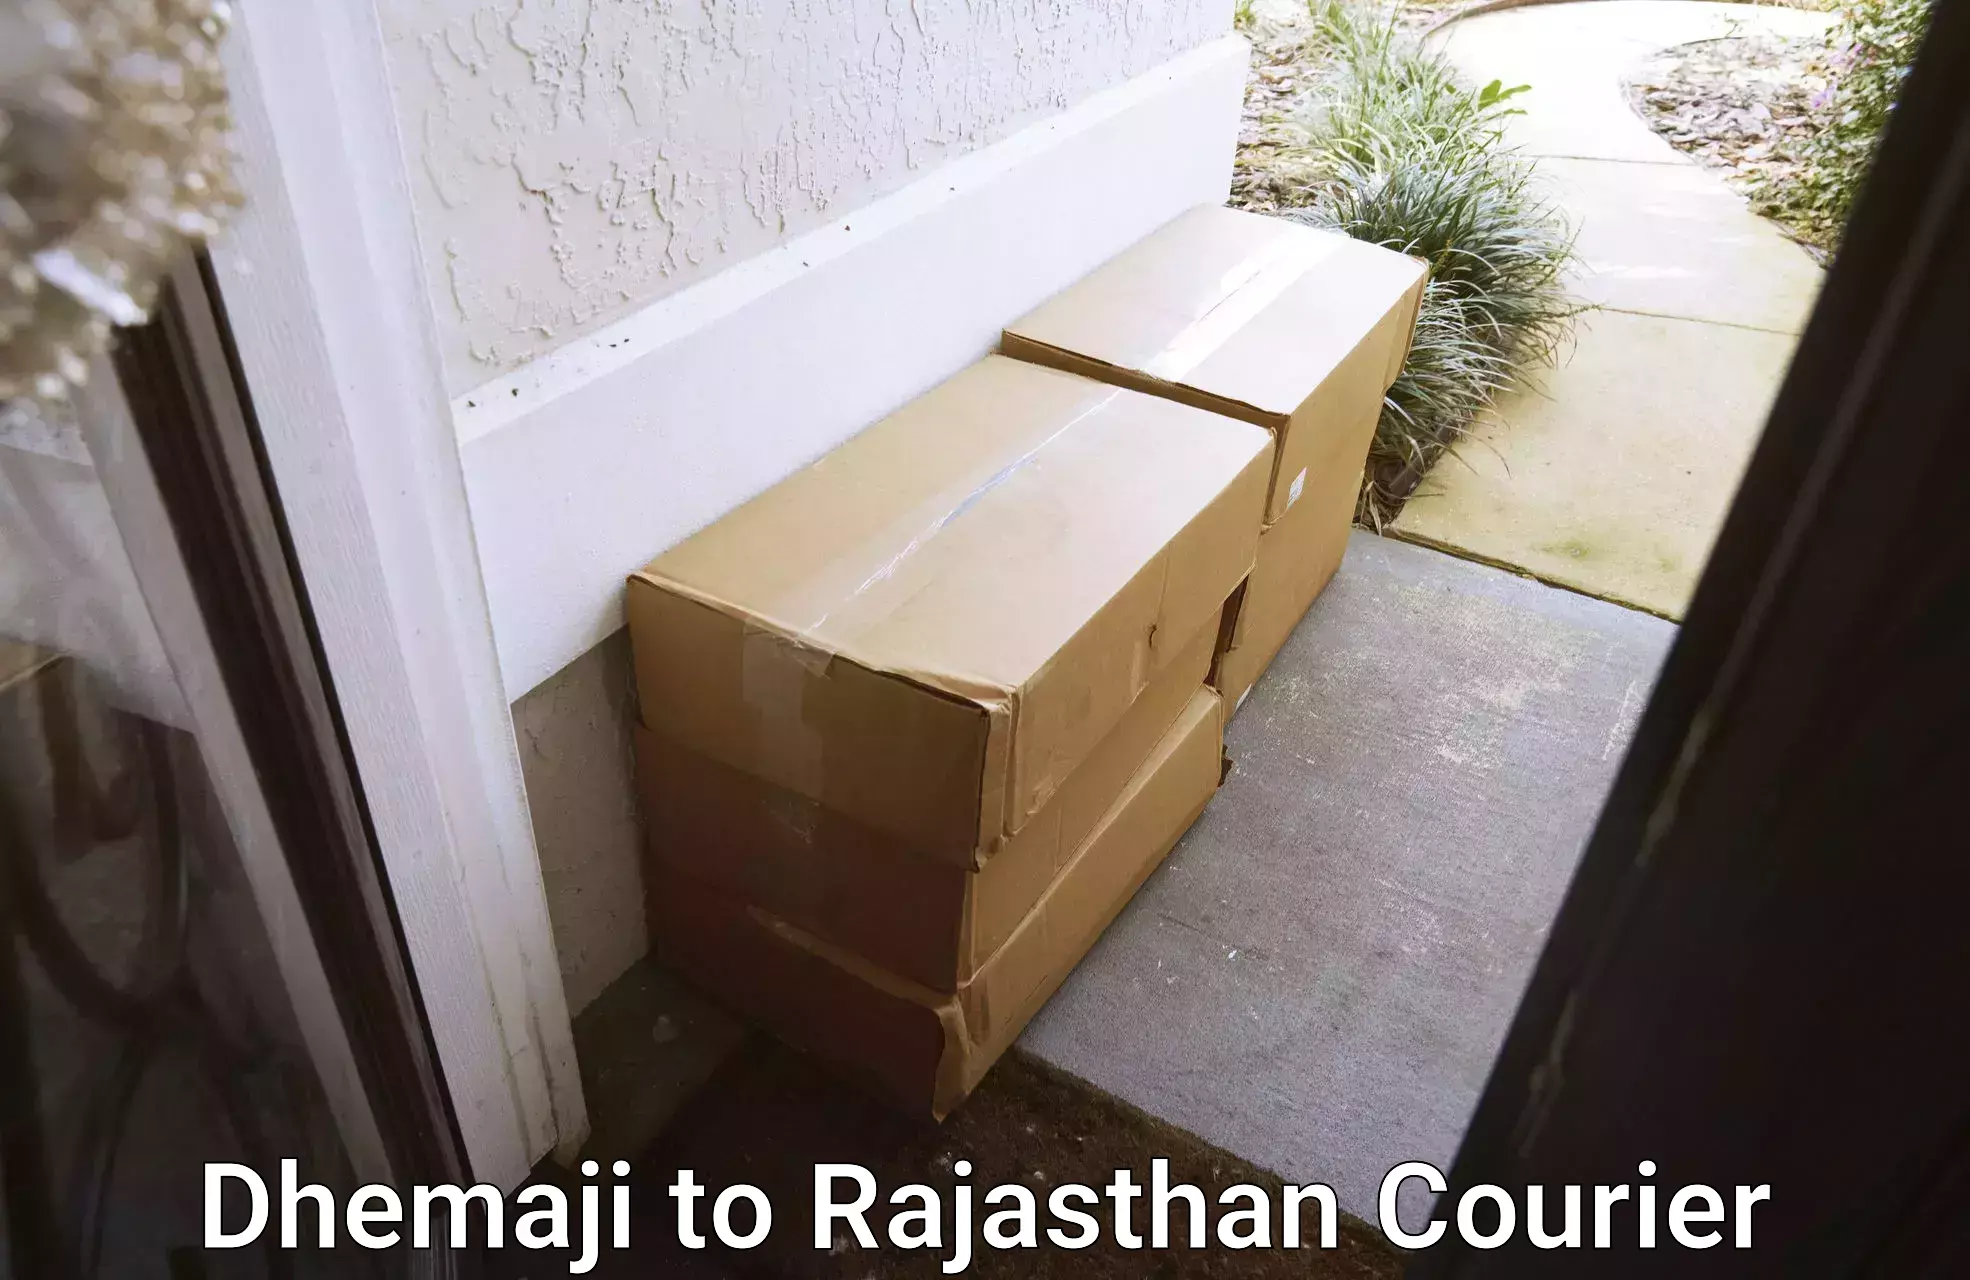 Automated parcel services Dhemaji to Rajasthan